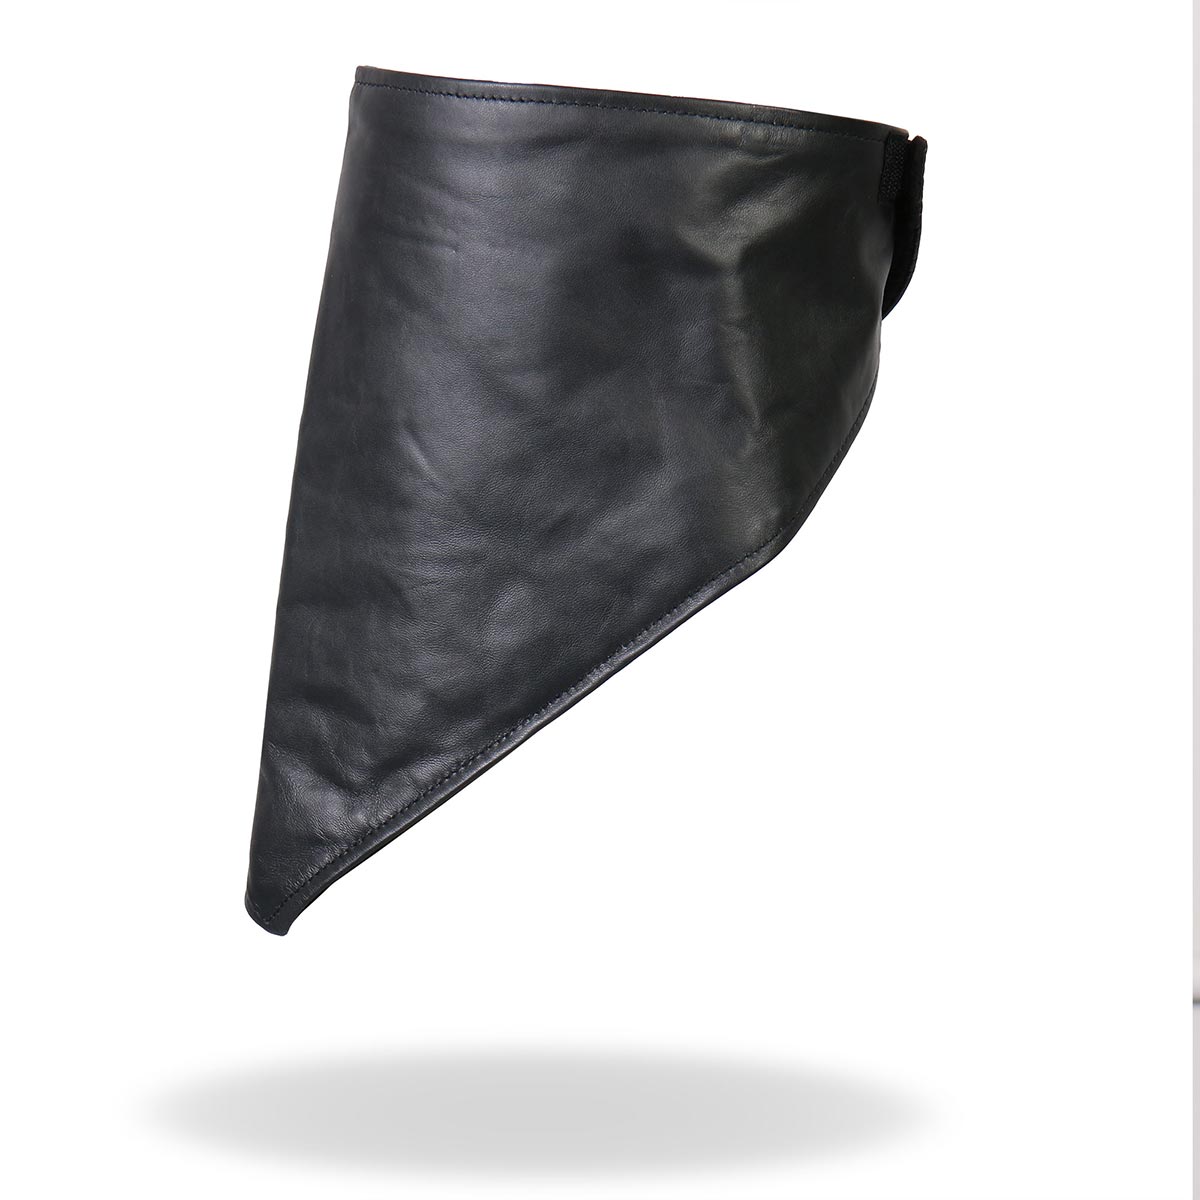 Hot Leathers NWL1002 Black Neck Warmer with Fleece Lining